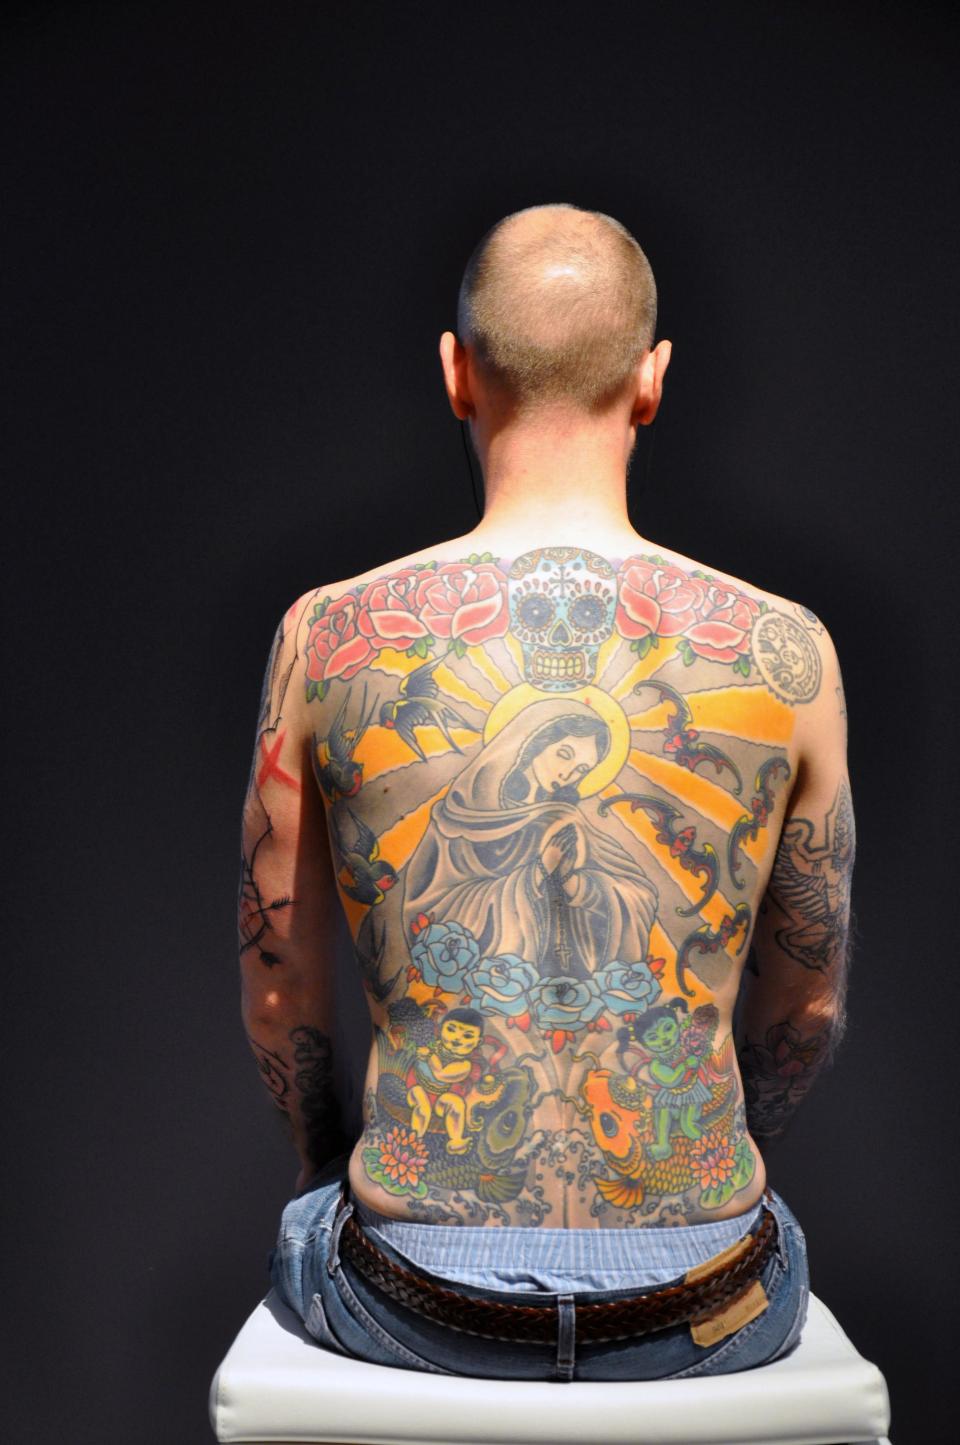 <b><p>Tim</p></b> Tattooed Tim is Wim Delvoye's living work of art. Delvoye actually sold Tim's skin. So, one day, when Tim dies, his skin will be removed and it will belong to the person who paid for it. What do you think of this? Does this qualify as art or does it demean and objectify a human being?